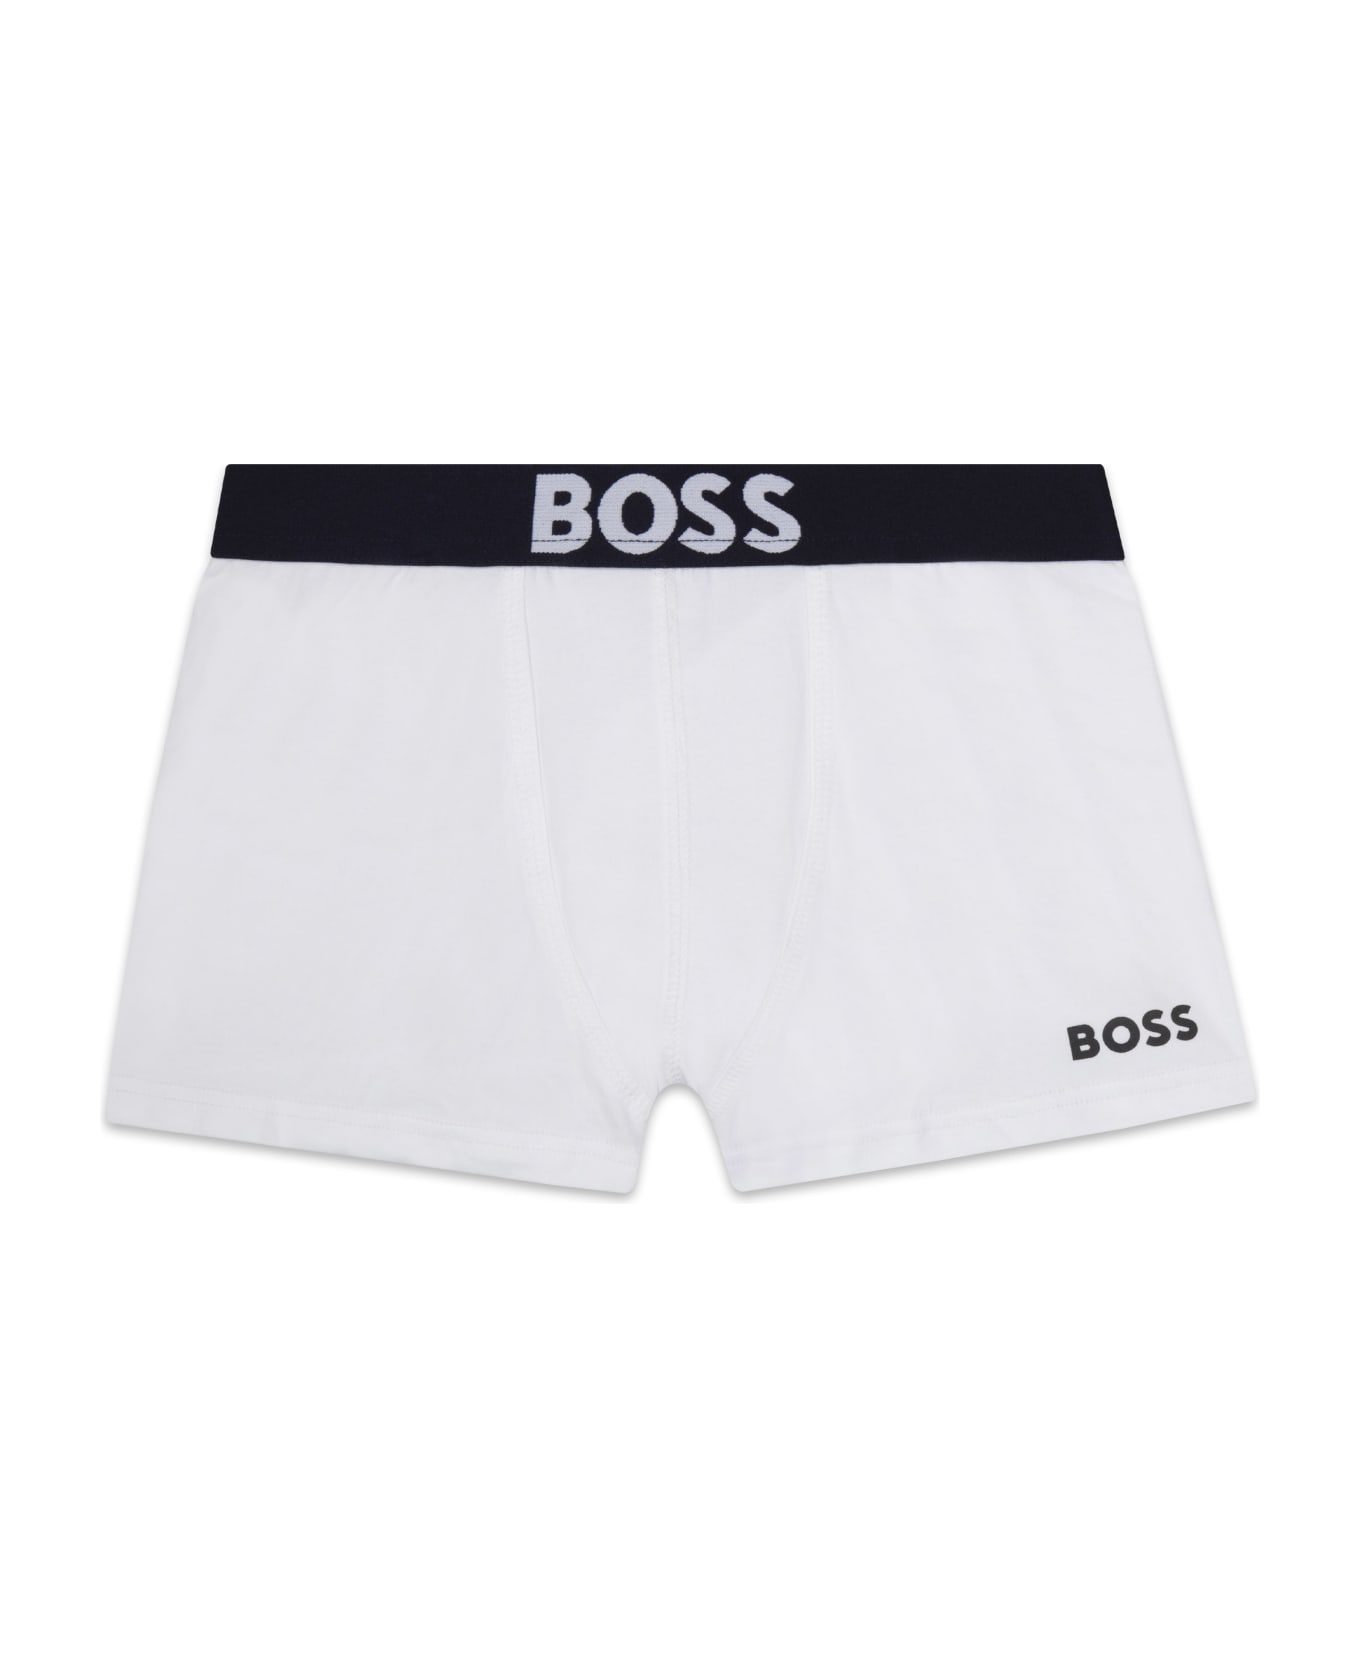 Hugo Boss Set Of 2 Boxers With Print - Blue